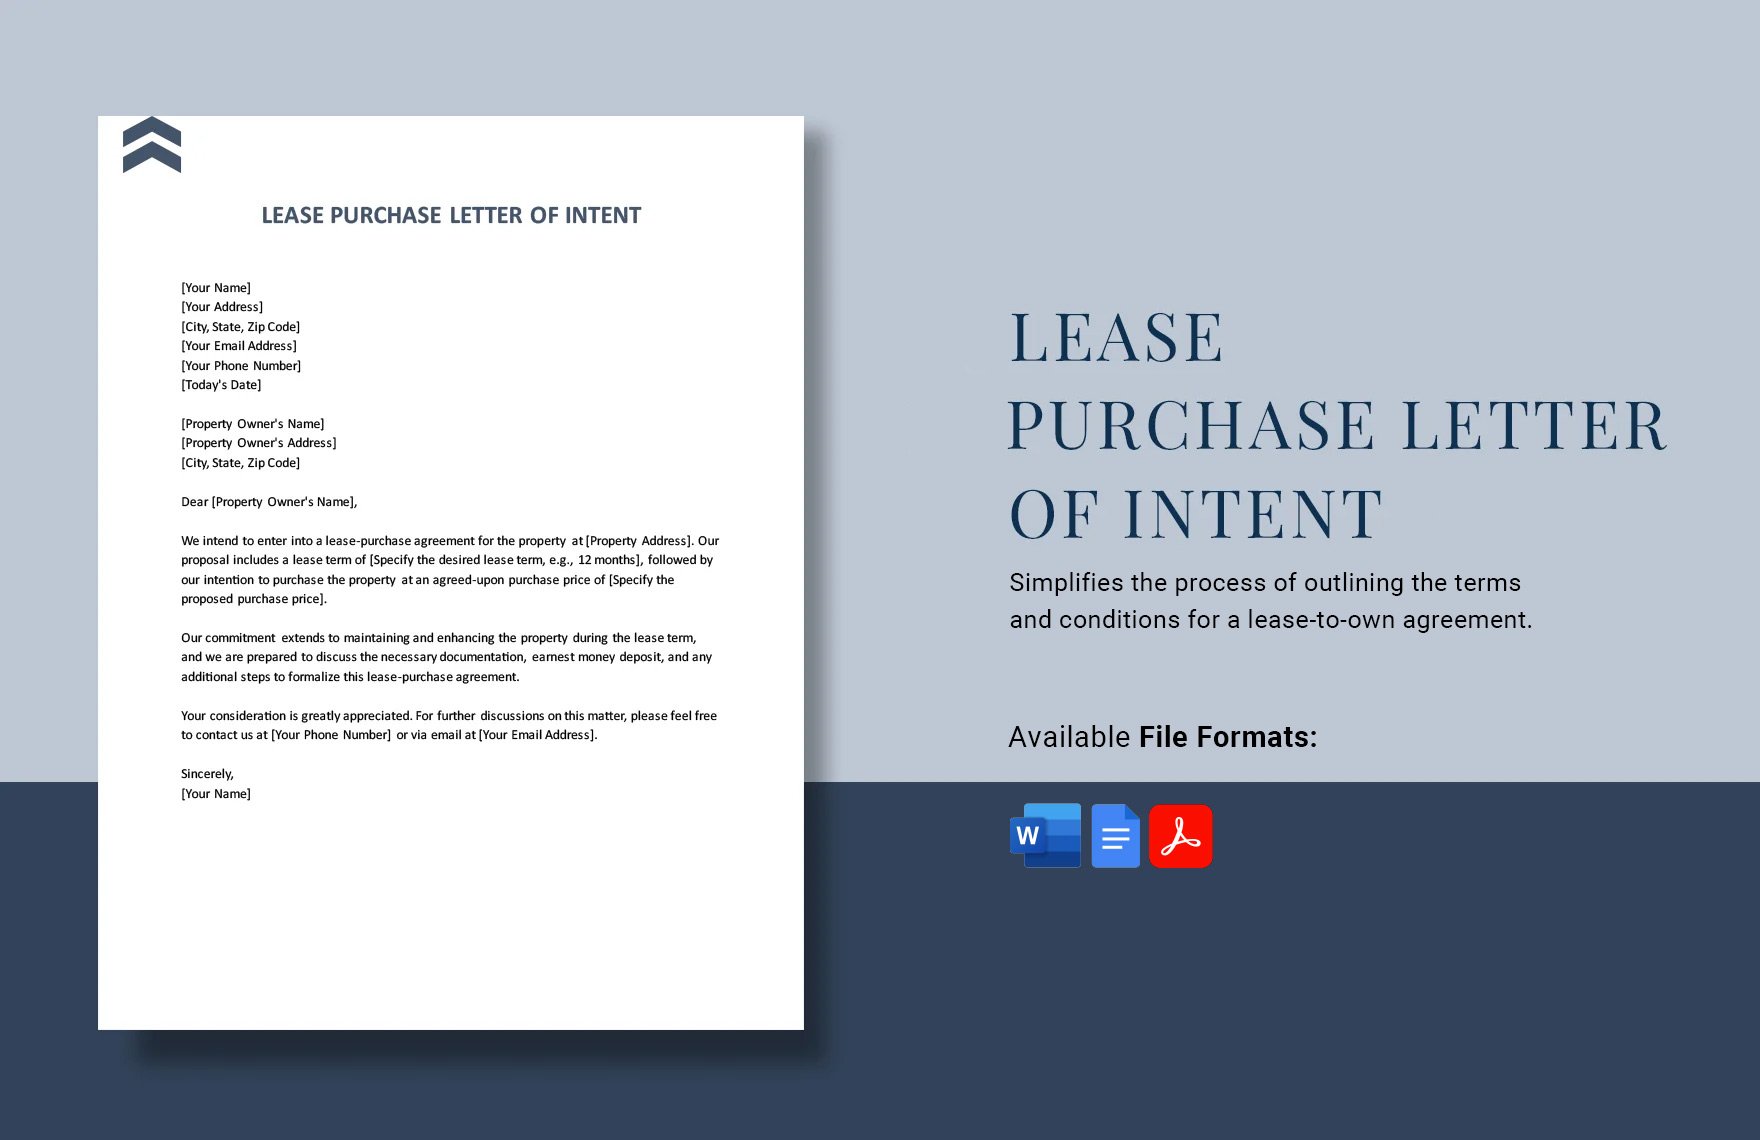 Lease Purchase Letter Of Intent in Word, Google Docs, PDF